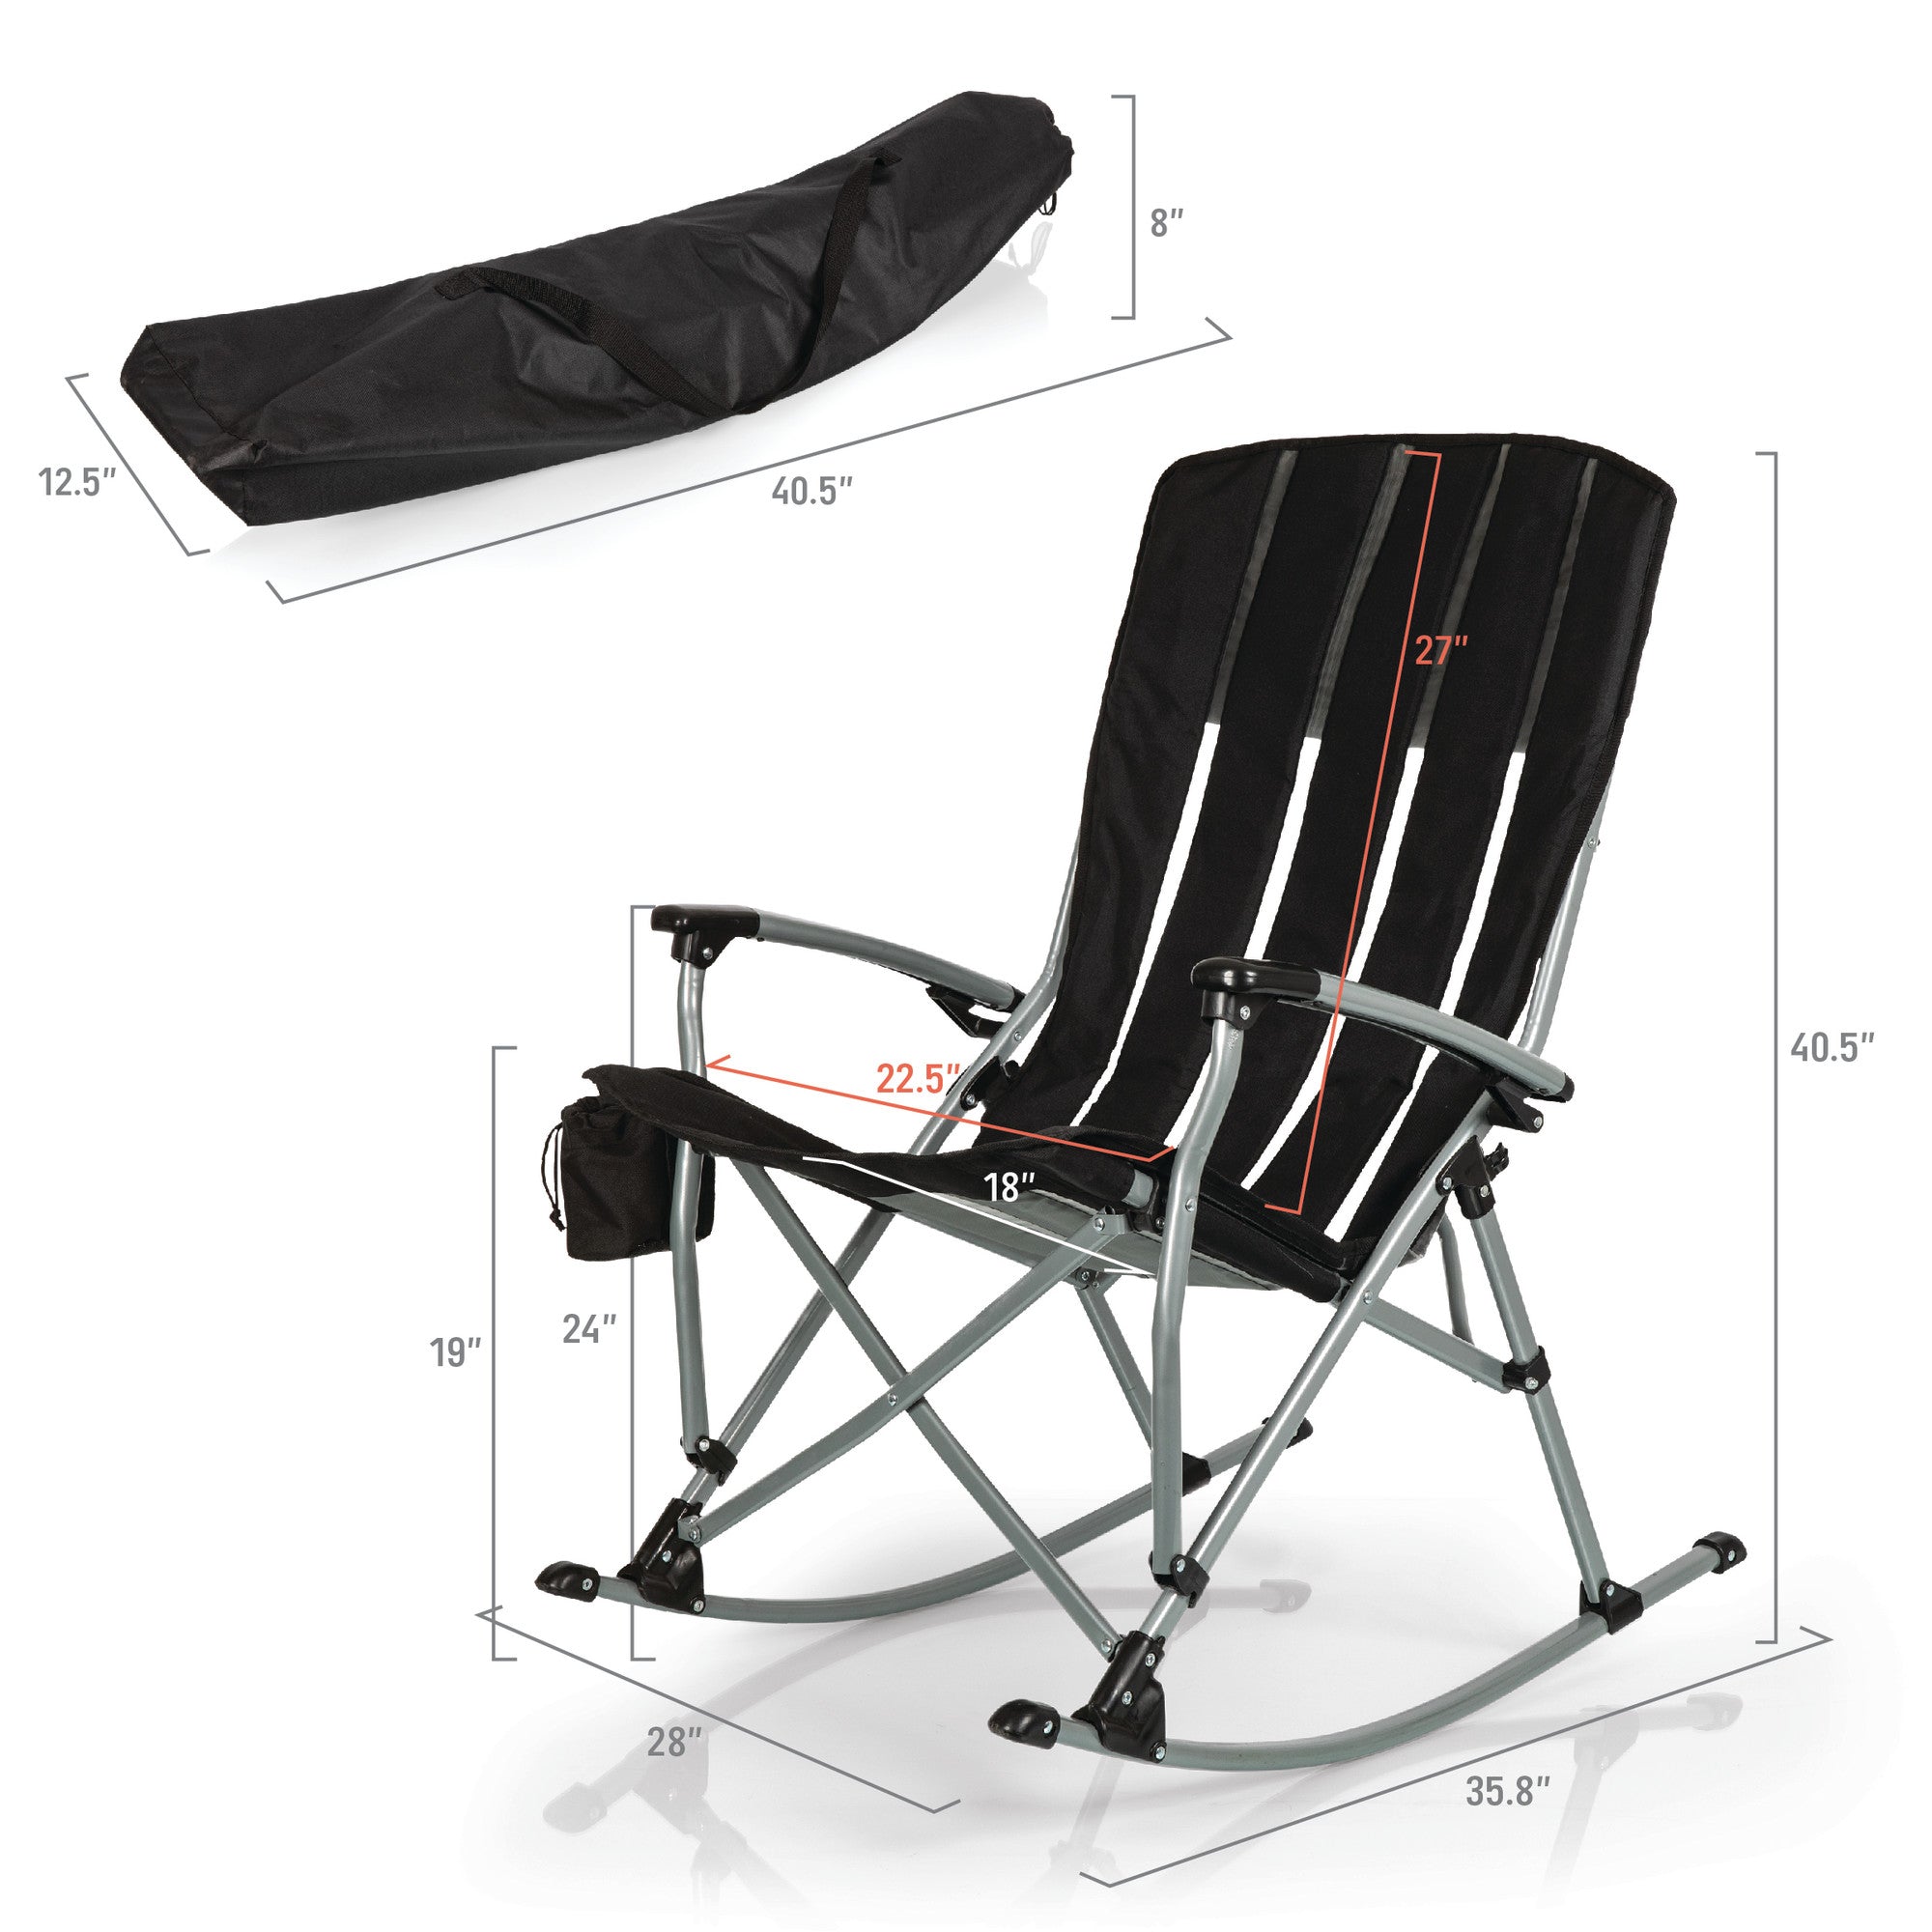 Chicago Bears - Outdoor Rocking Camp Chair